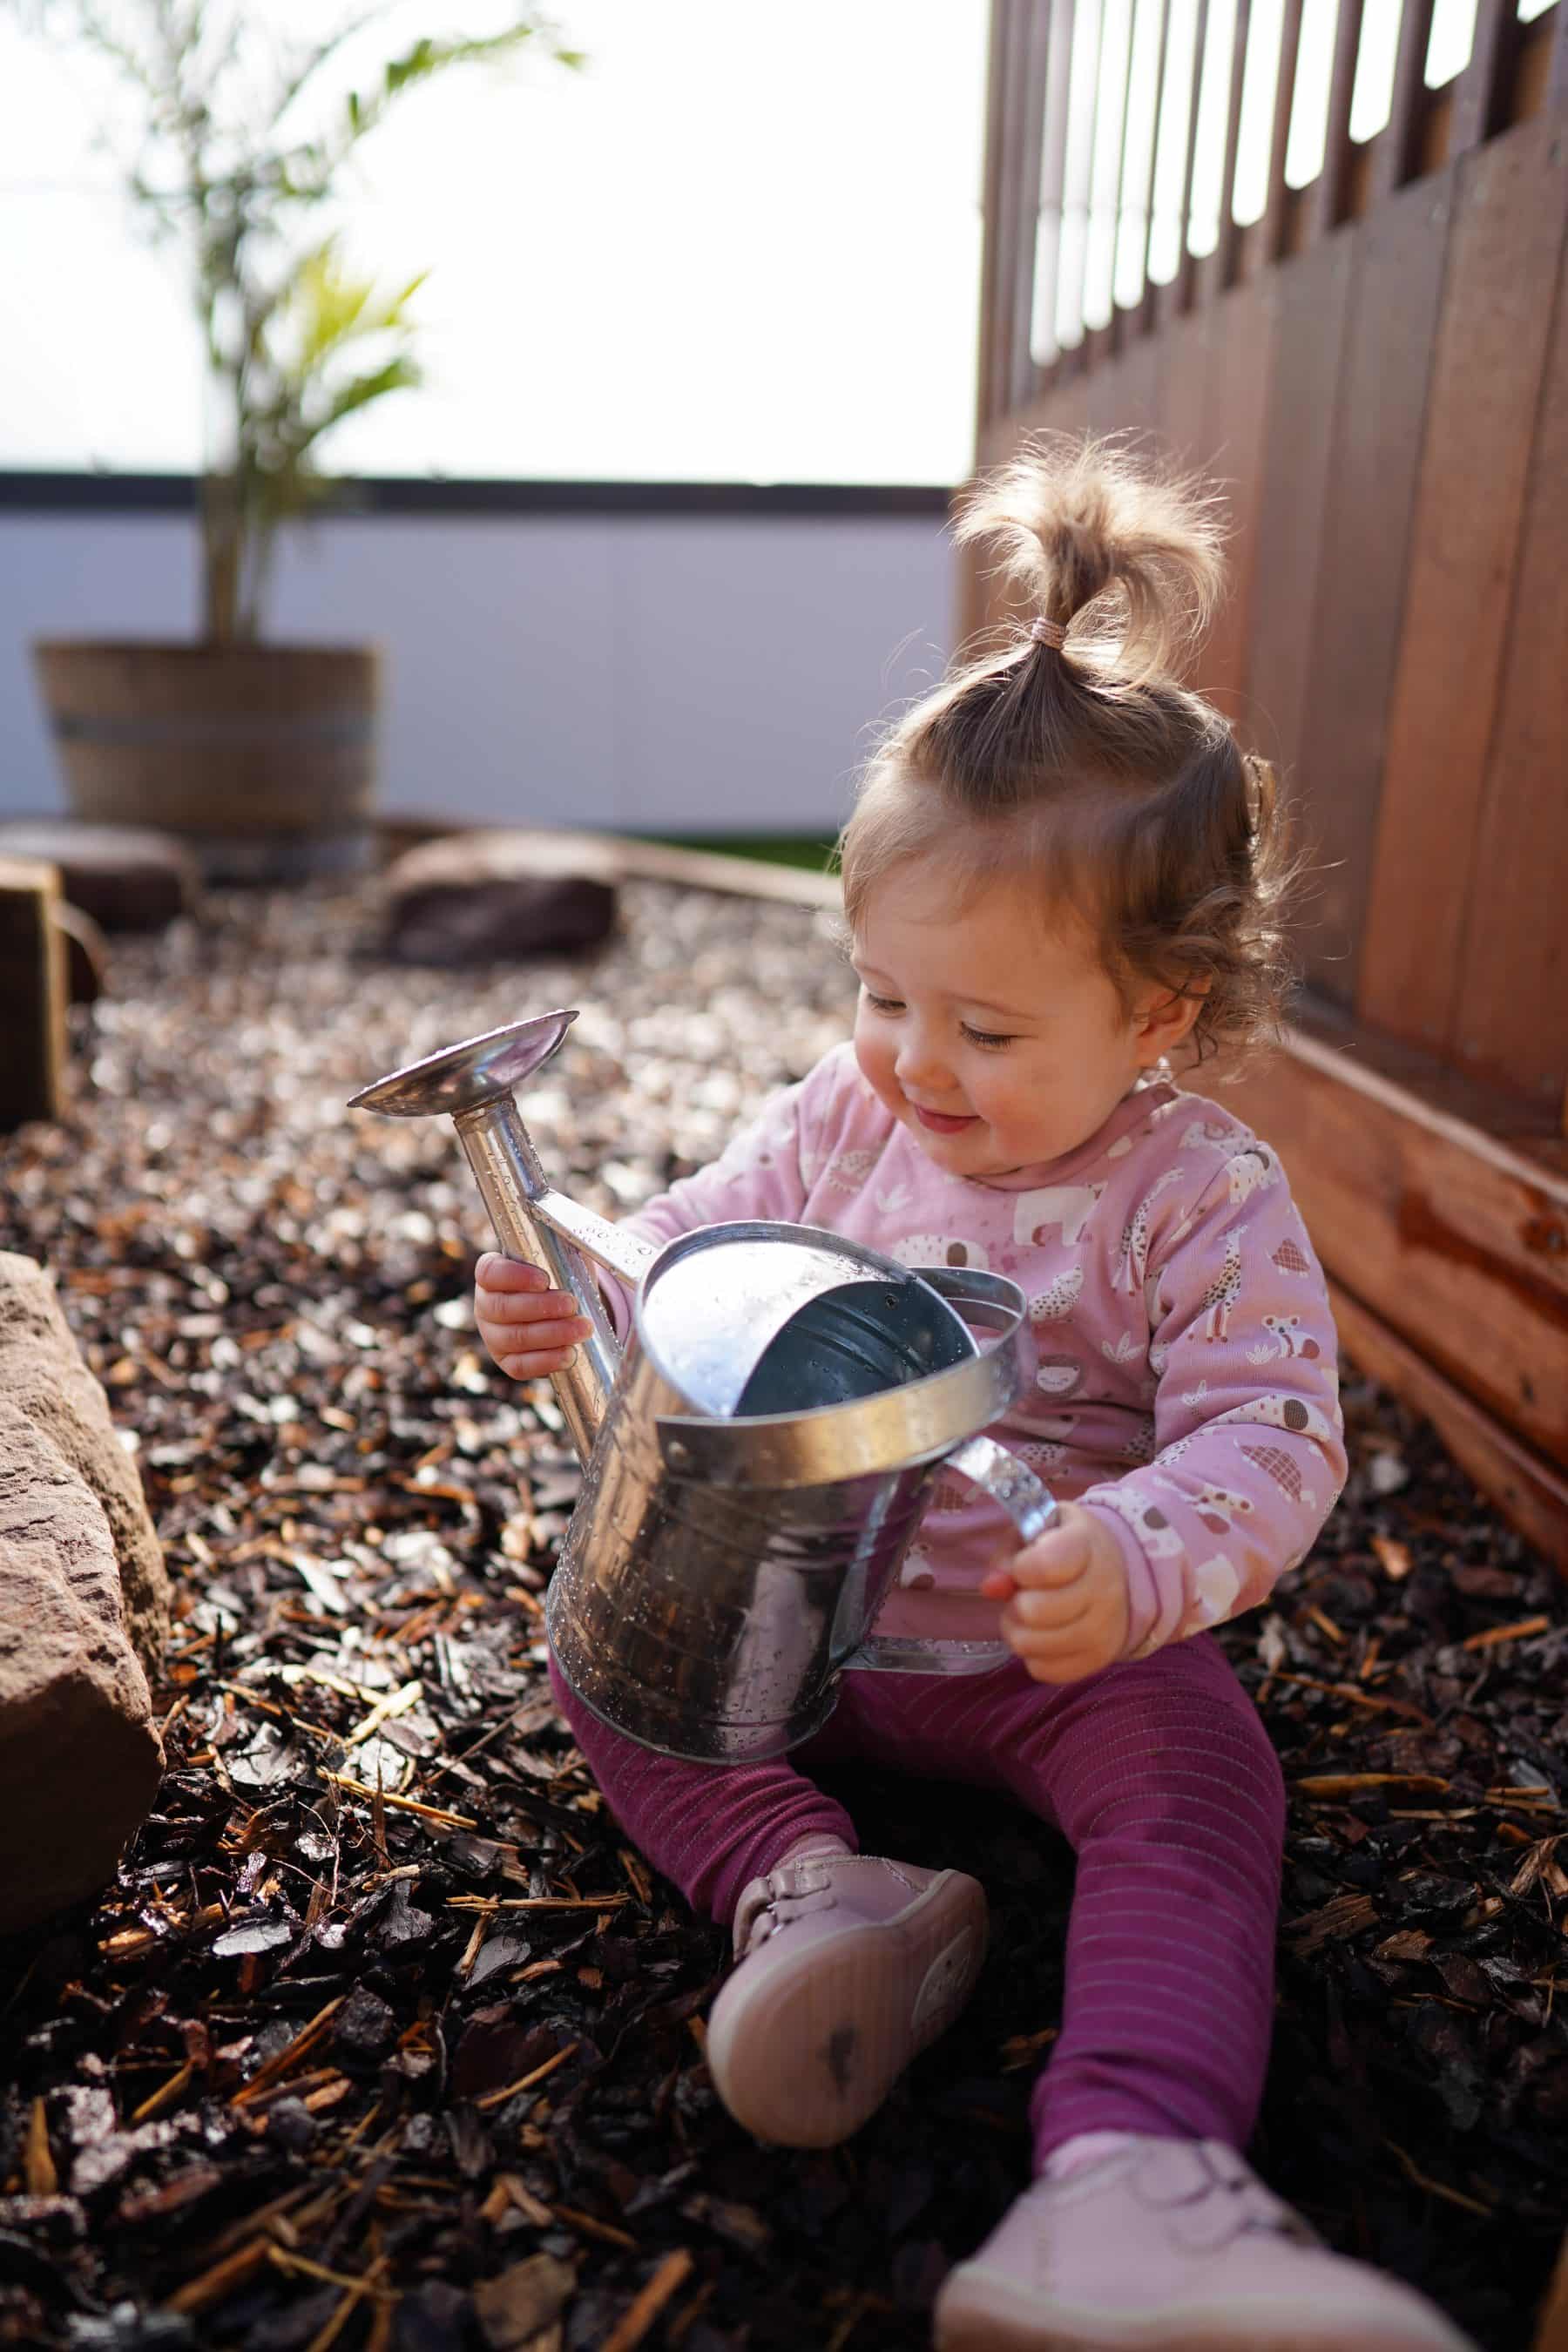 Child with watering can